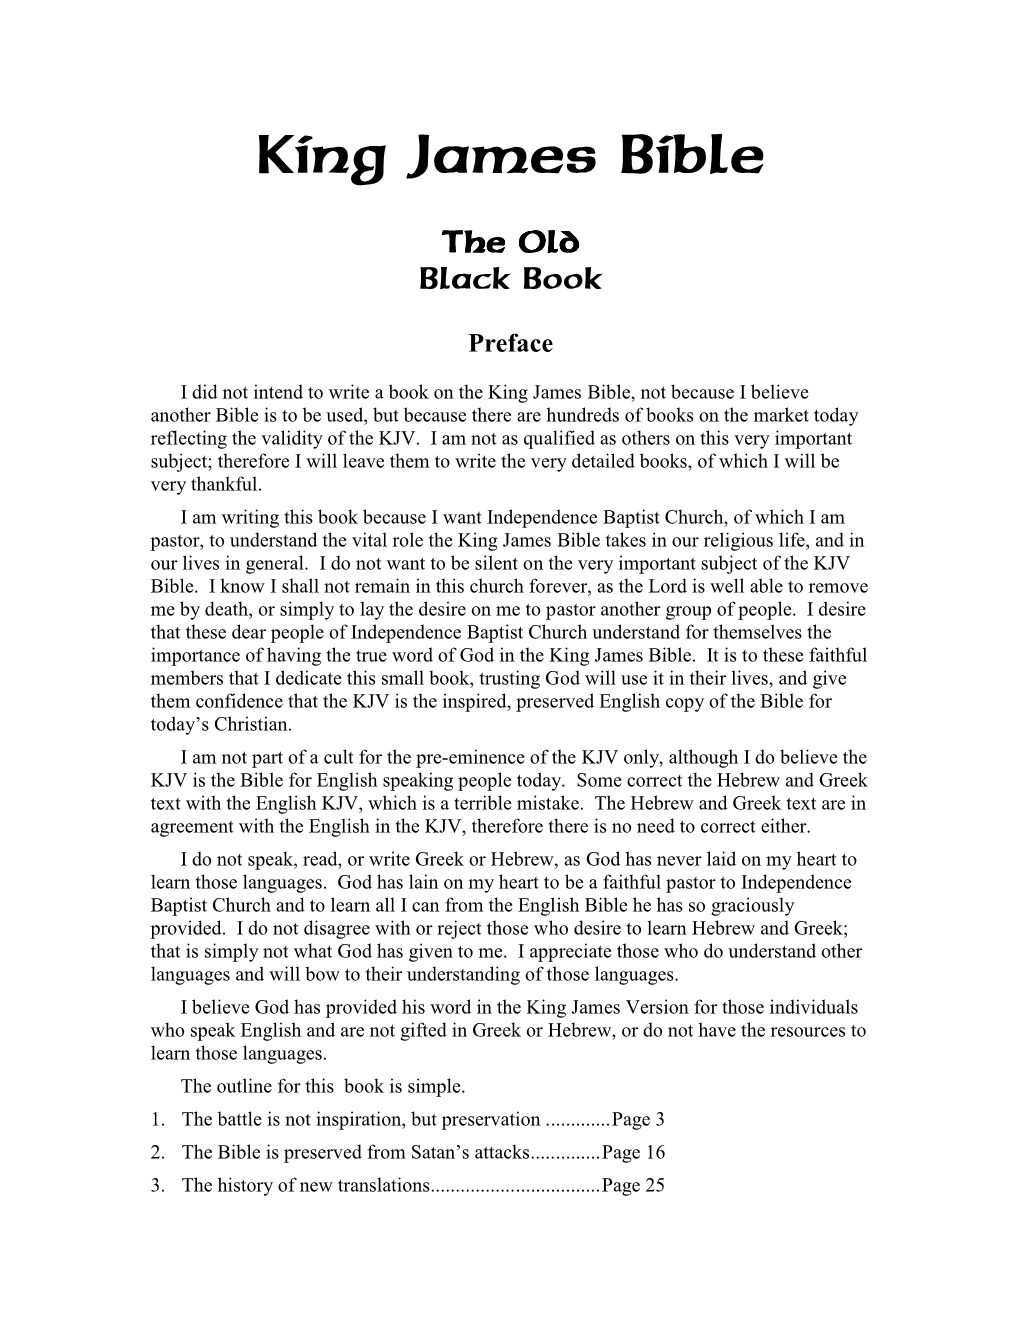 The Old Black Book – the King James Bible Page 2